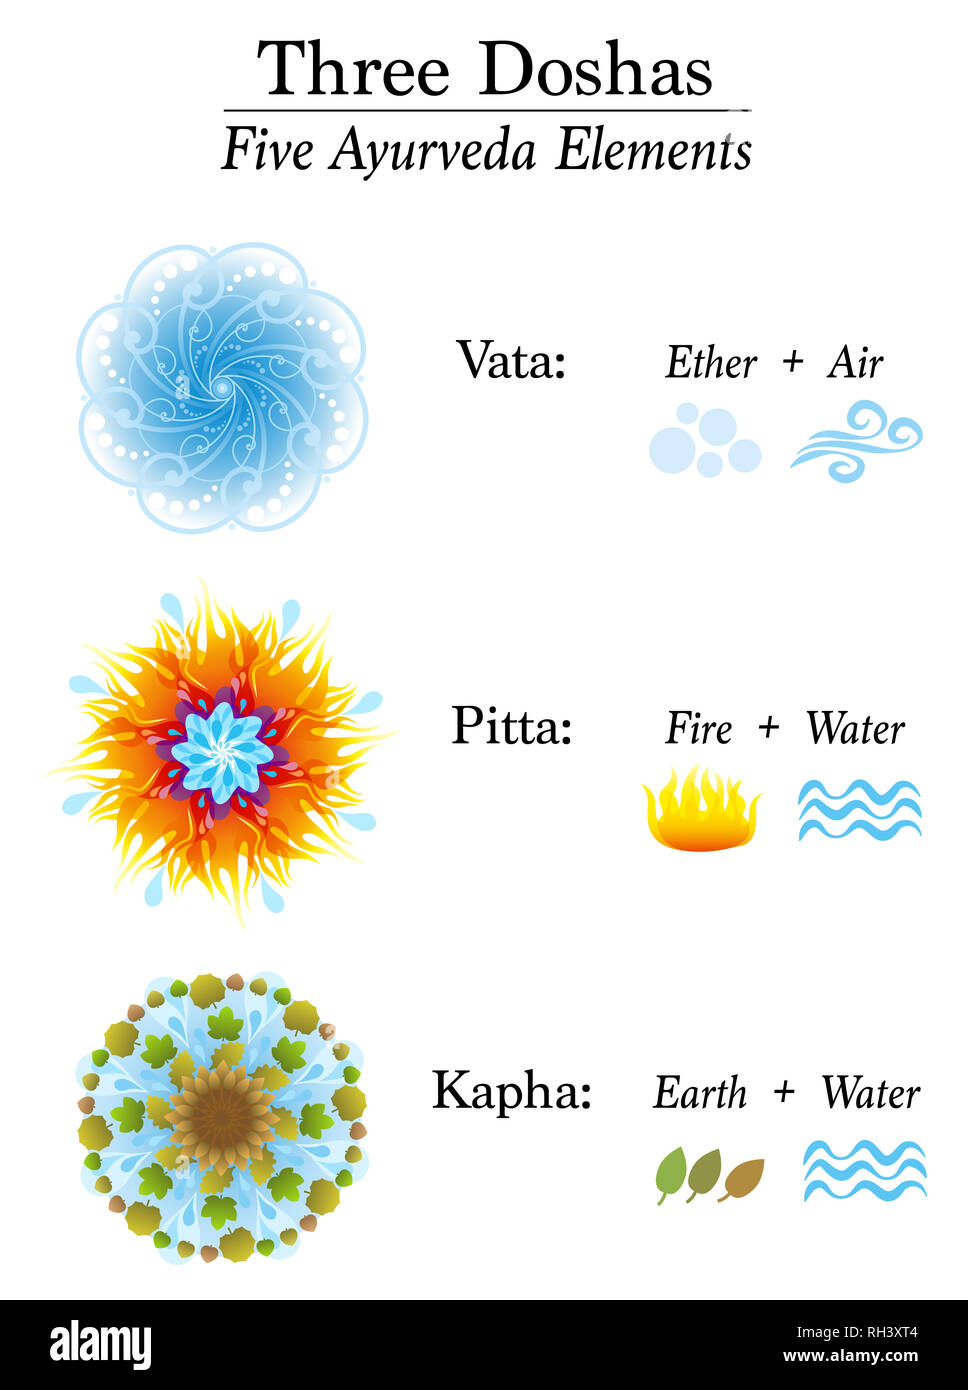 Chart with three Doshas and their five Ayurveda elements - Vata, Pitta, Kapha - Ether, Air, Fire, Water and Earth. Ayurvedic symbols. Stock Photo